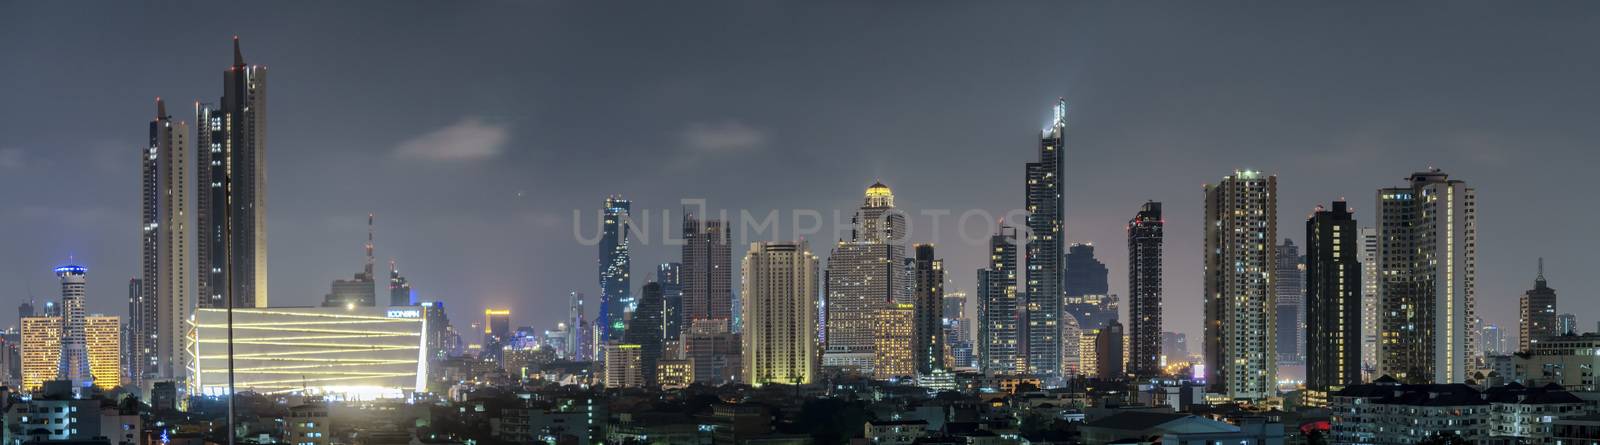 High-rise building in the capital city of Thailand Bangkok office area Night light from the building	

